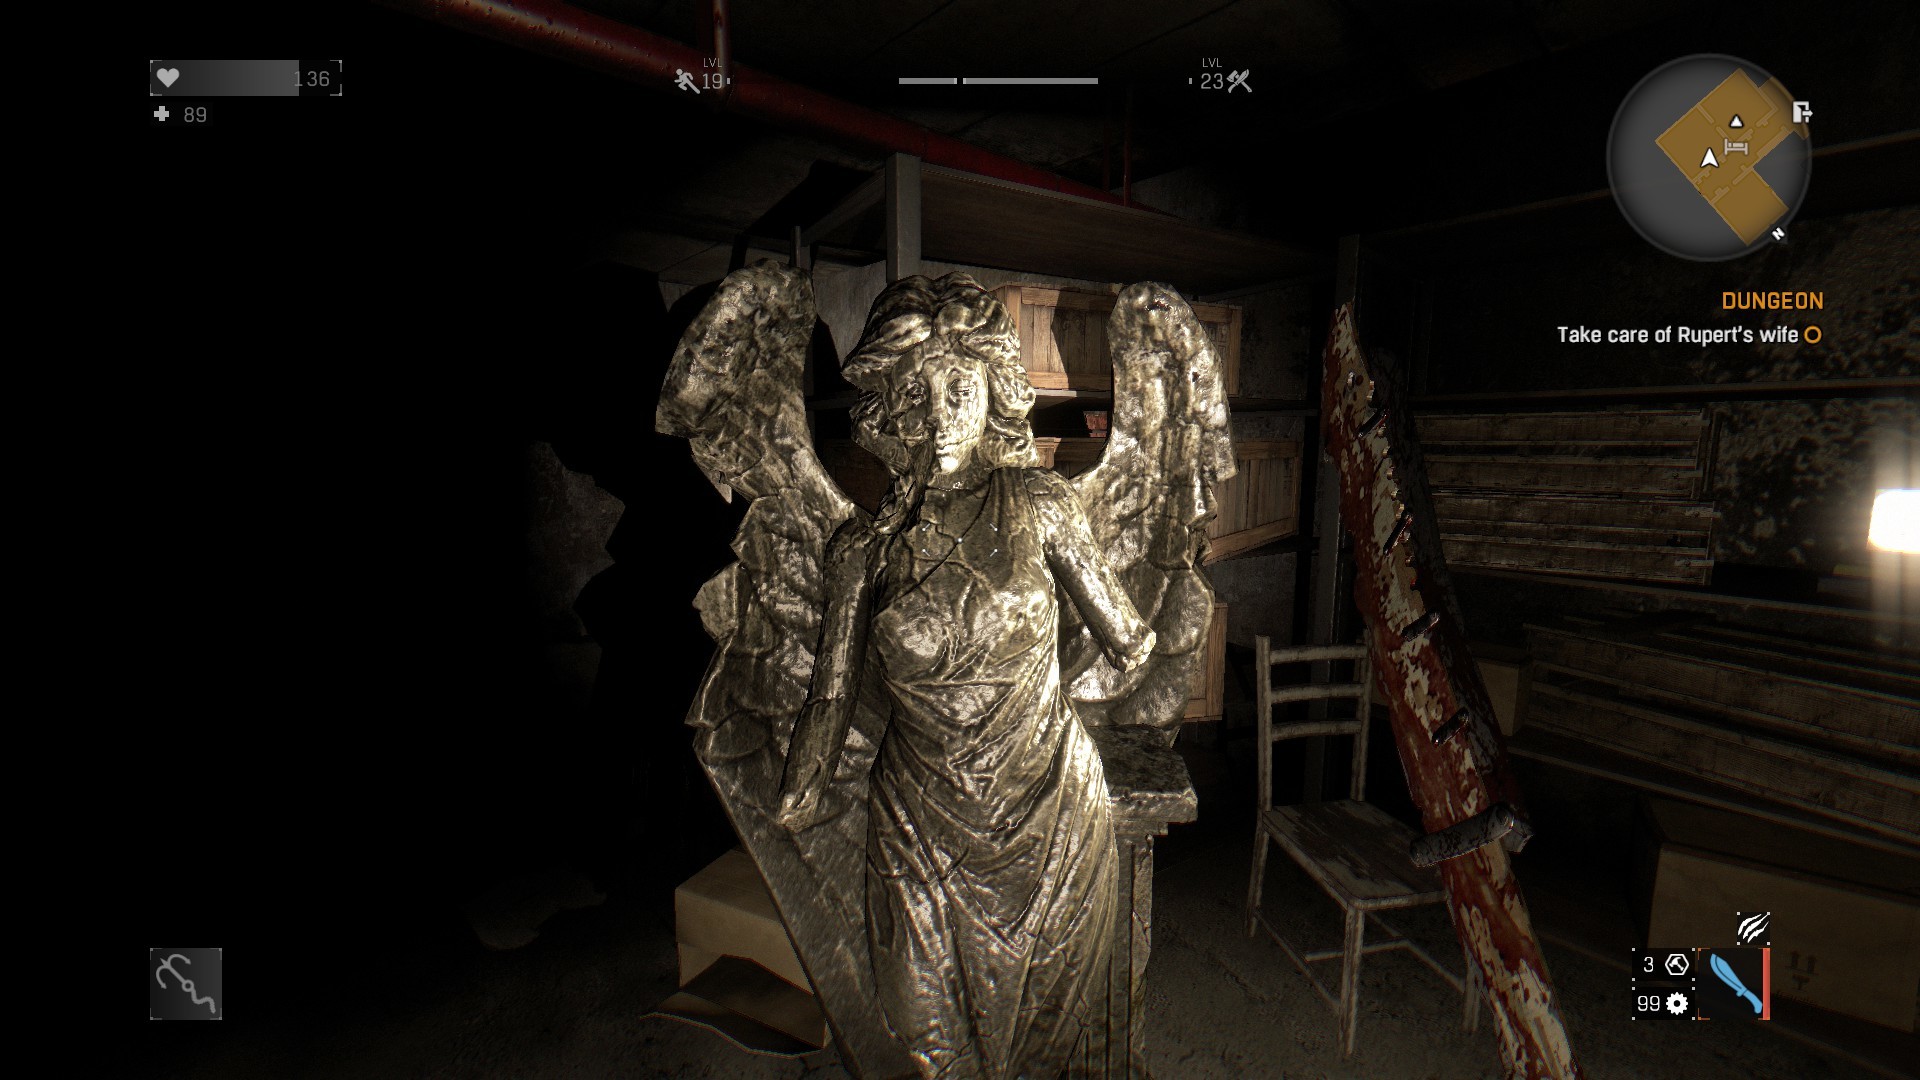 1920x1080 I thought it was a Weeping Angel for just a second when I found it.